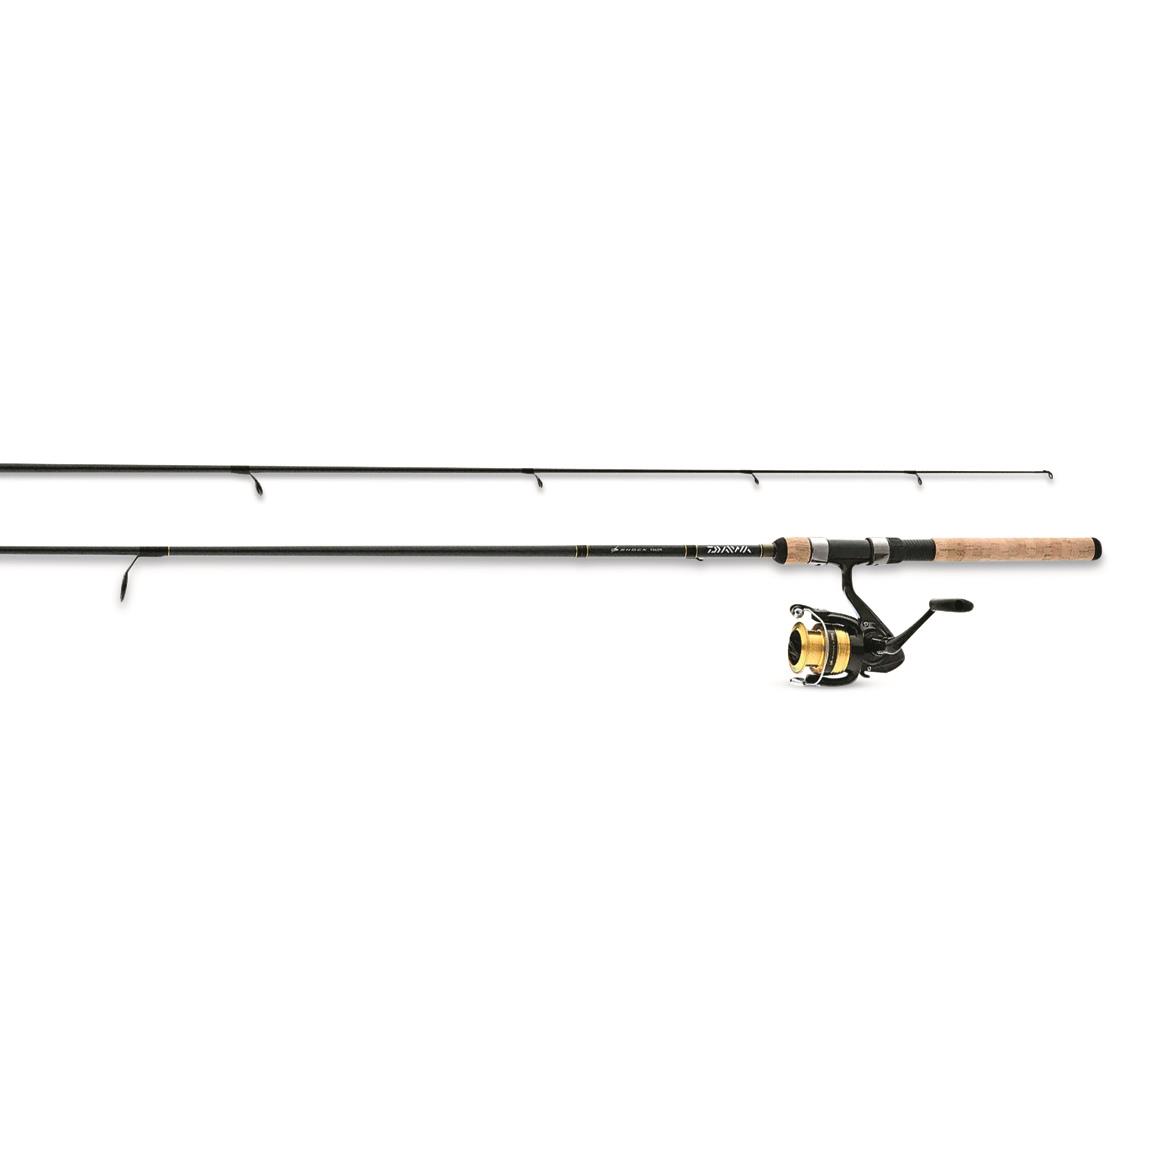 Ugly Stick Carbon Series Spinning Rod and Reel Combo - 715404, Spinning  Combos at Sportsman's Guide